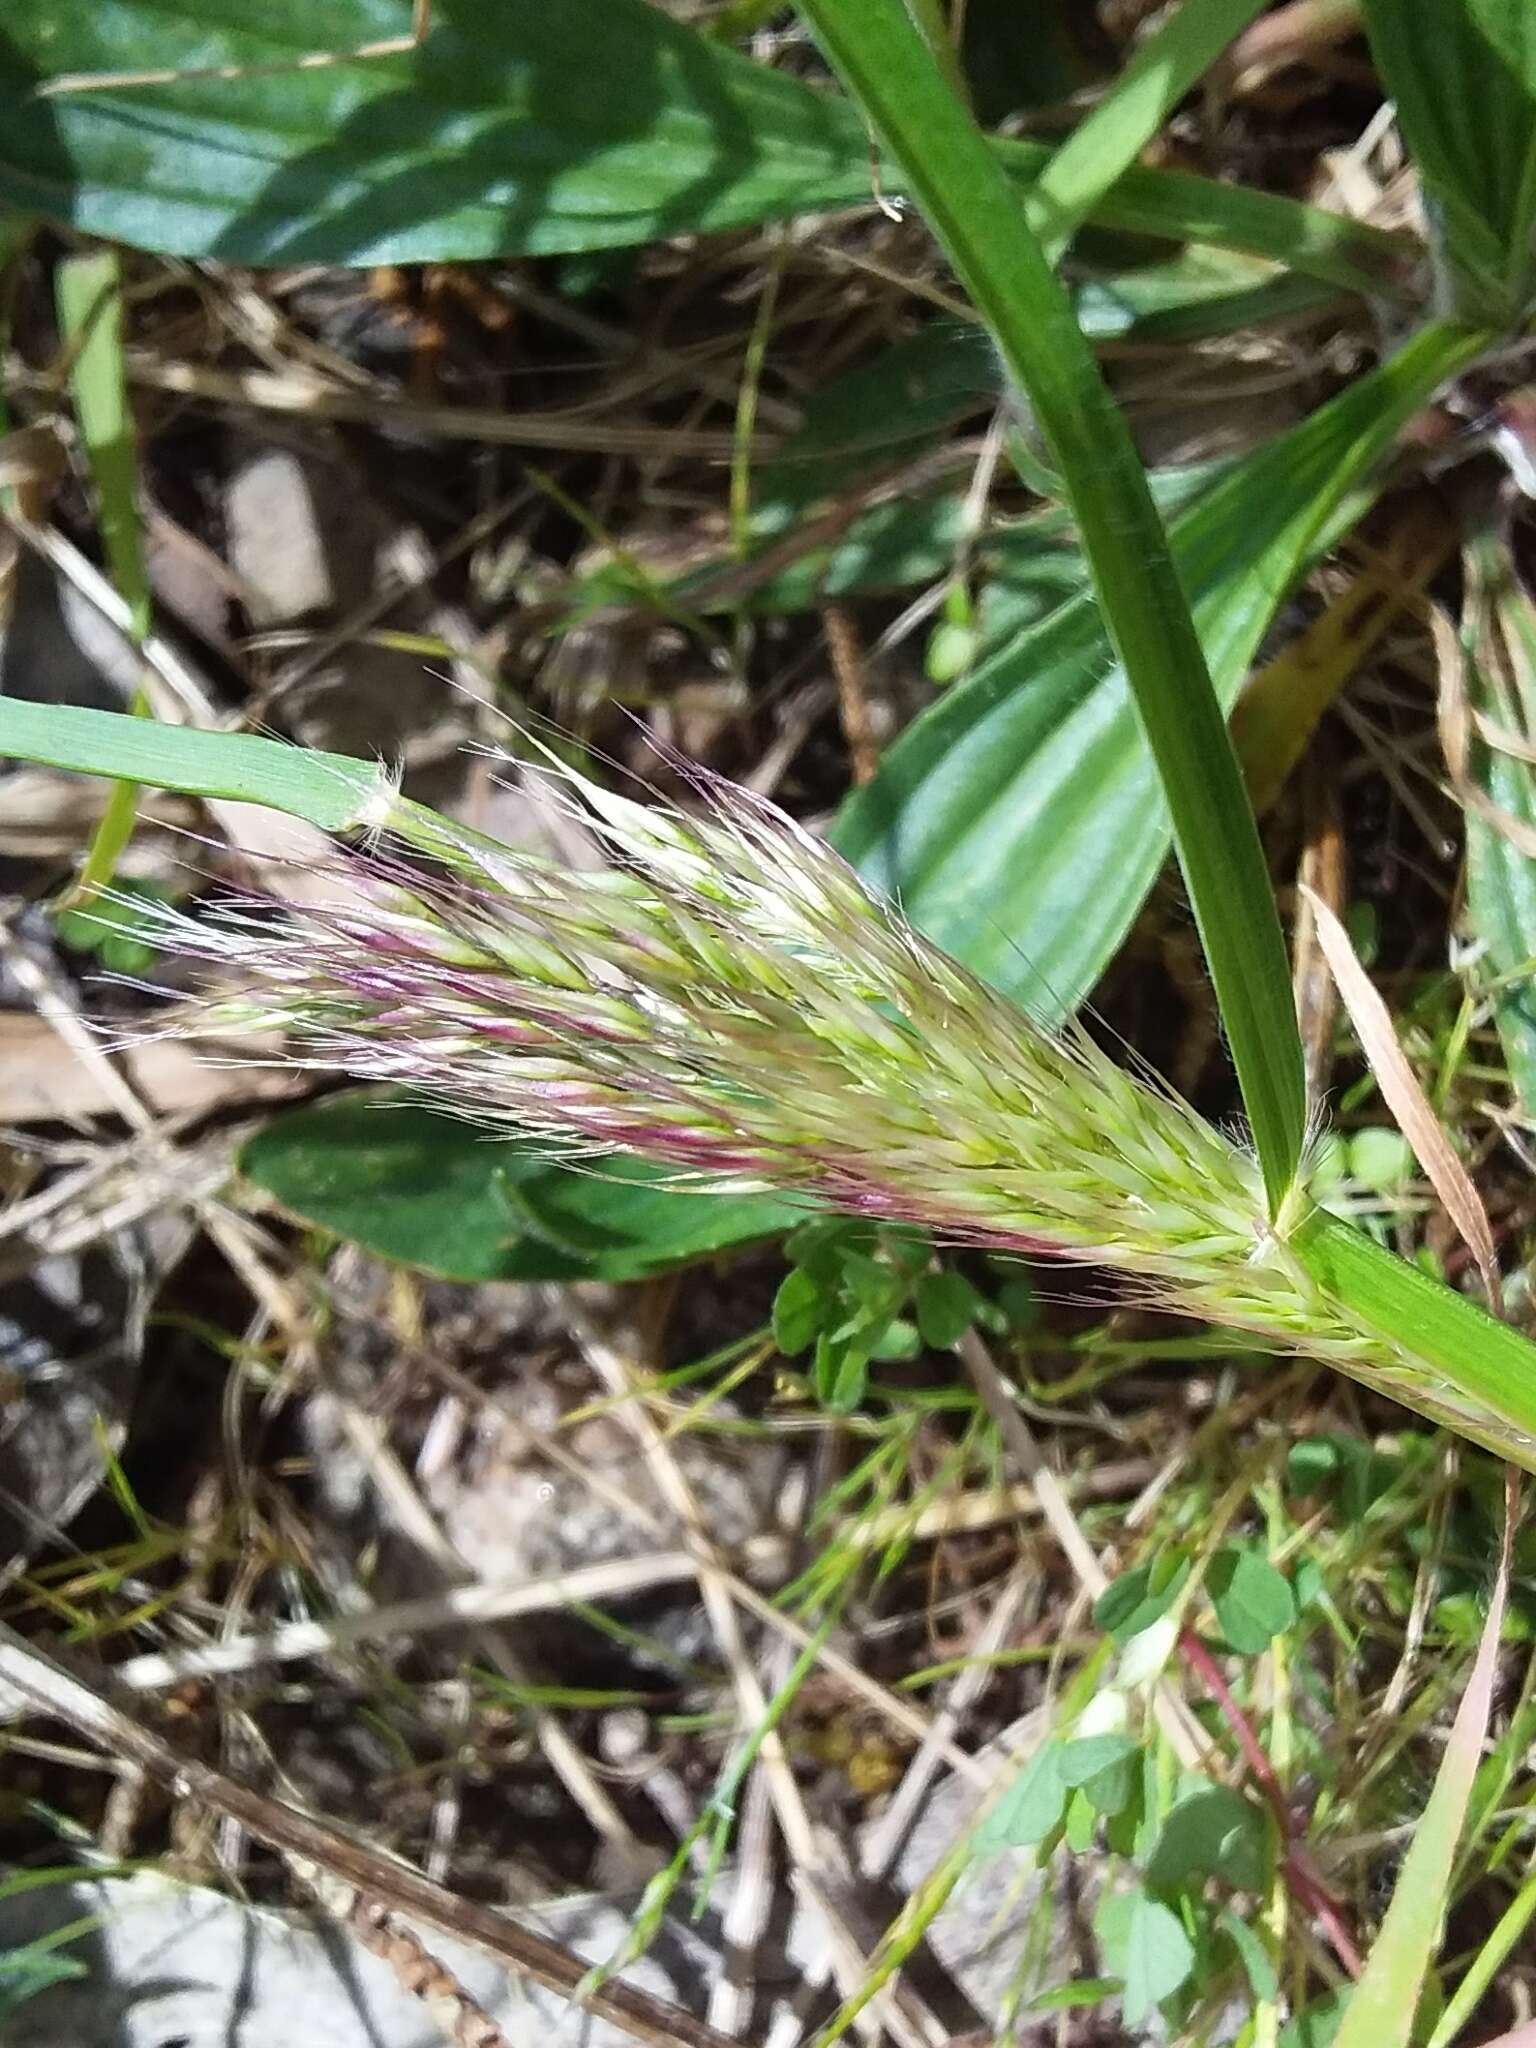 Image of Cape ricegrass